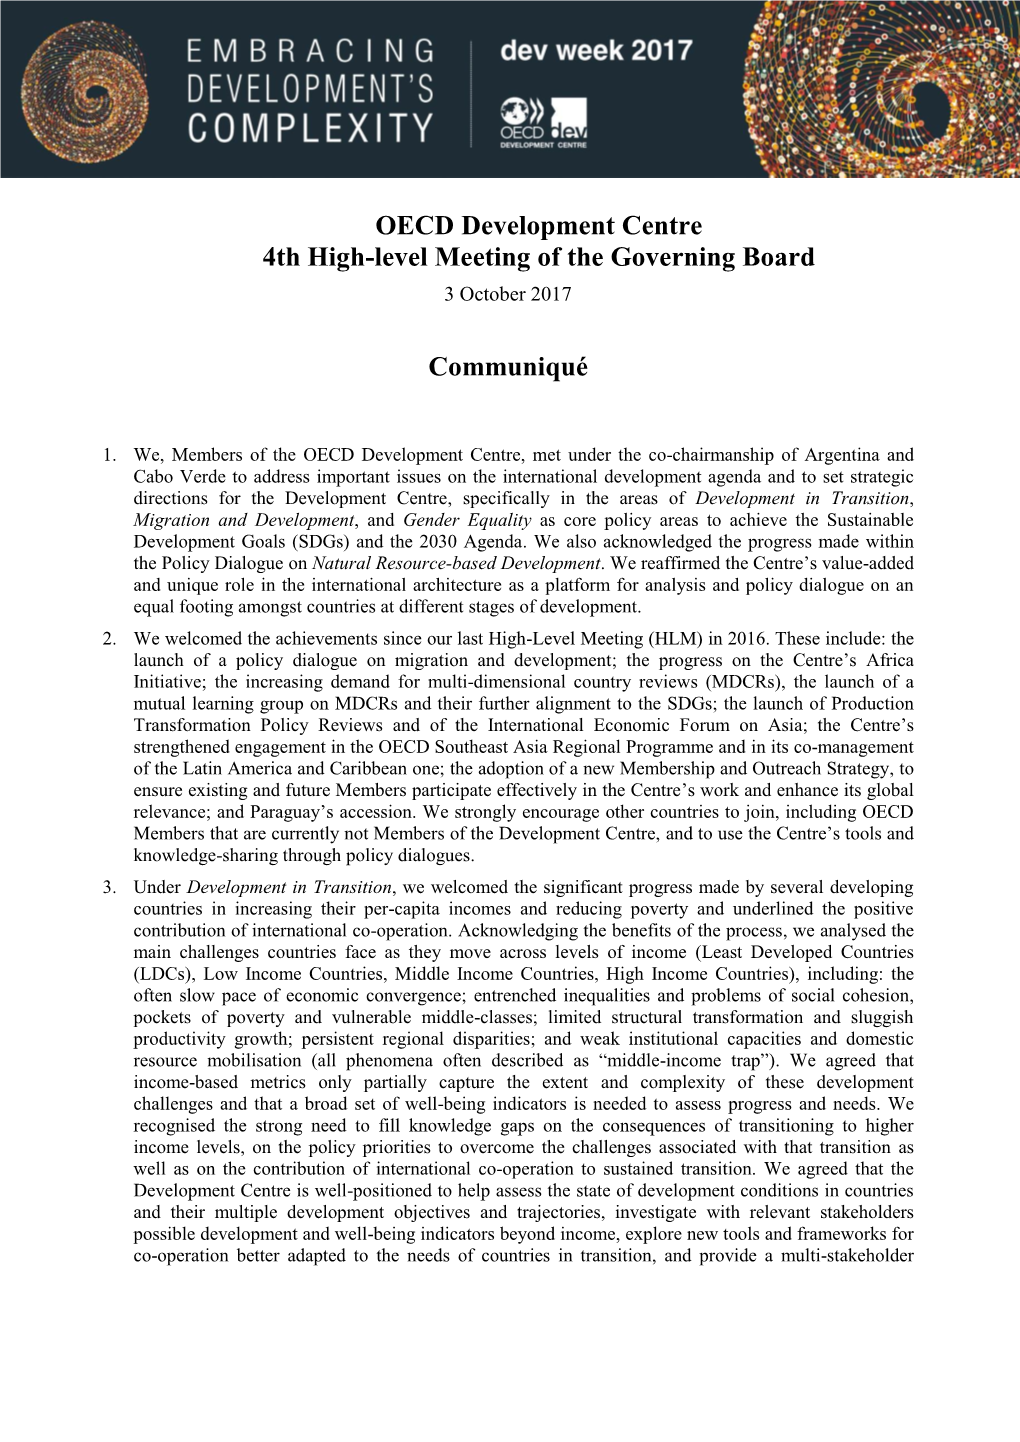 OECD Development Centre 4Th High-Level Meeting of the Governing Board 3 October 2017